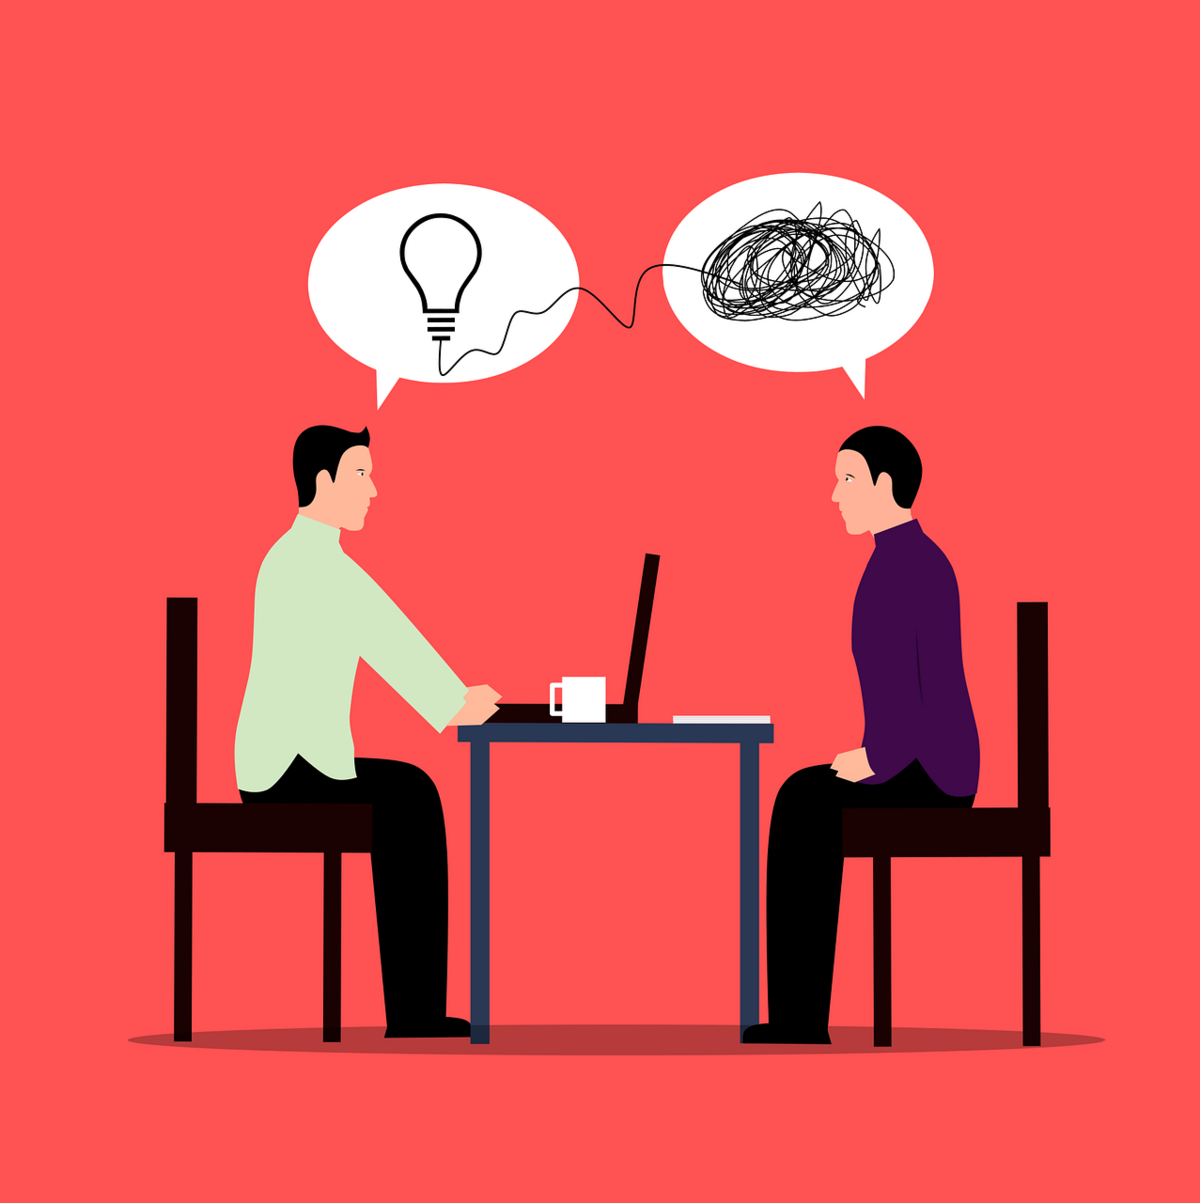 2 people sitting at a table with speech bubbles above them, 1 bubble with a lightbulb connected to the scribble in the other bubble